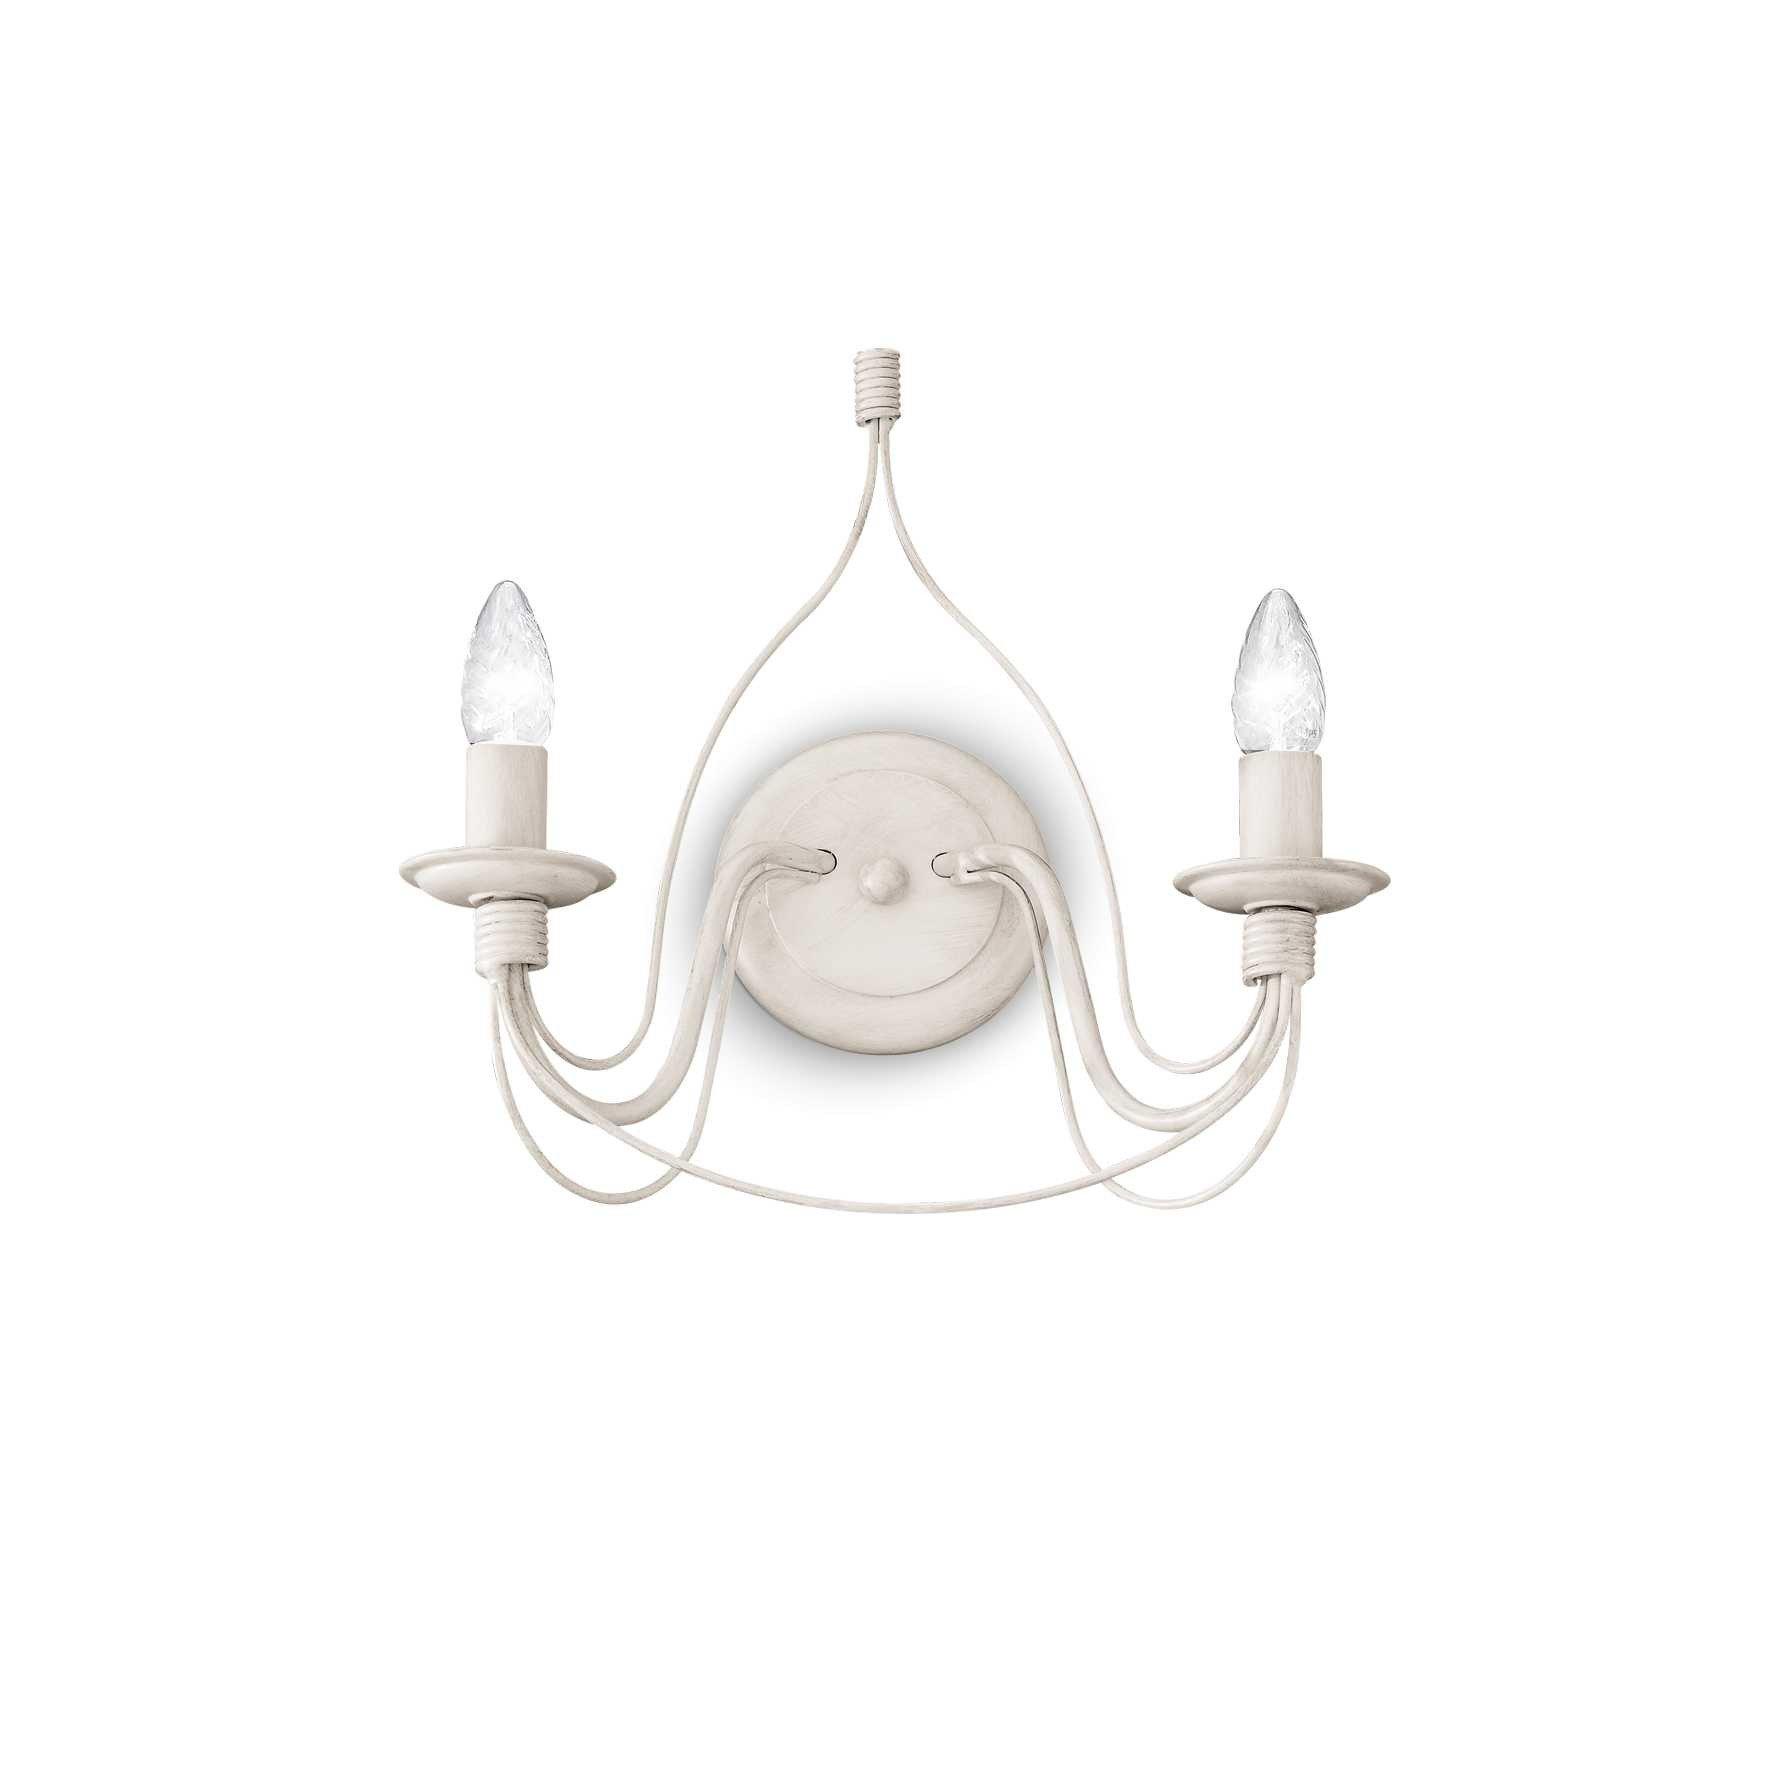 Corte 2 Light Indoor Candle Wall Light Antique White E14